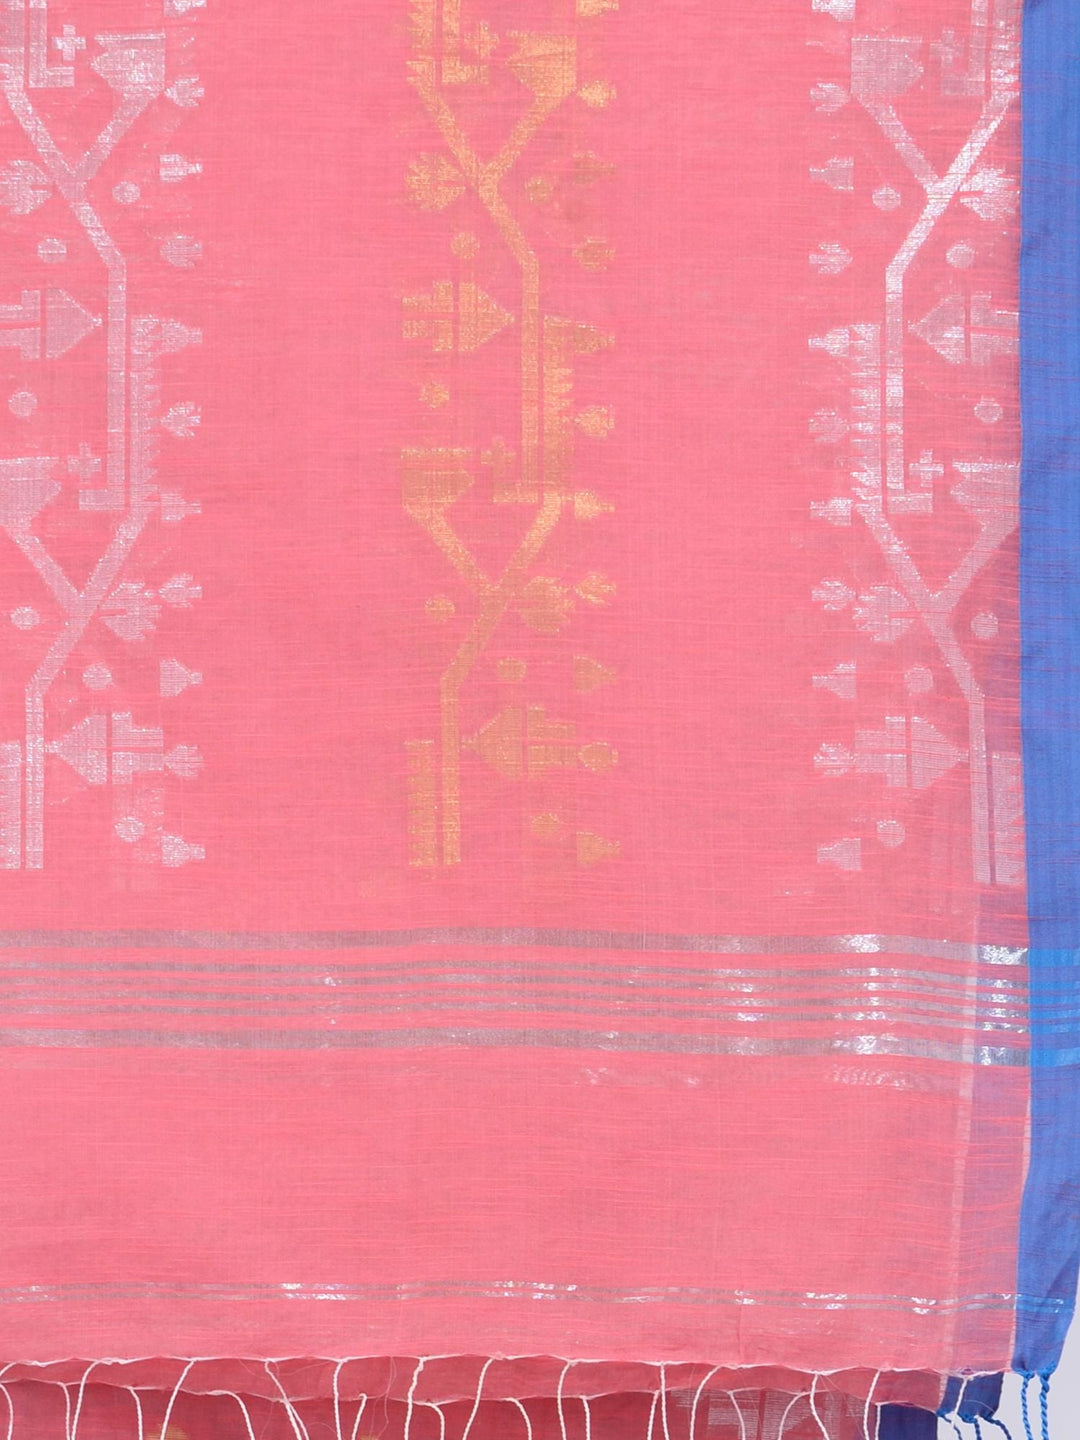 CHARUKRITI Pink Pure Cotton Handwoven Saree with Geometric Border with Unstitched Blouse